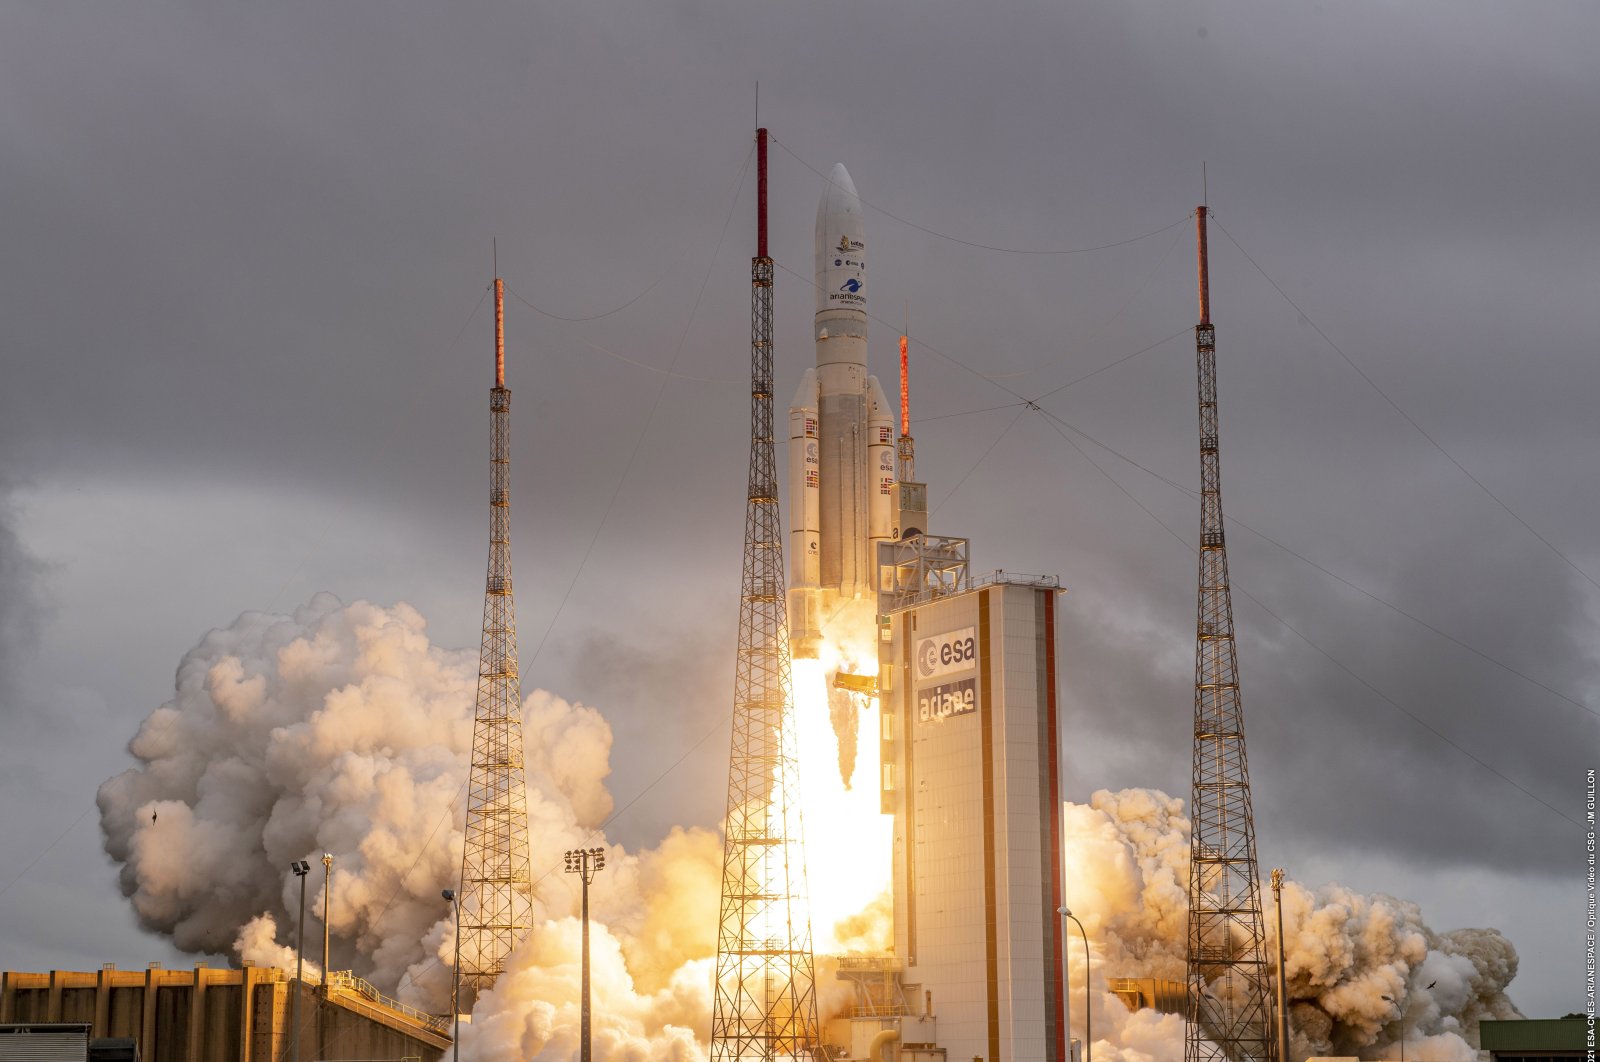 Arianespace&#039;s Ariane 5 rocket with NASA&#039;s James Webb Space Telescope onboard, lifts off Saturday, Dec. 25, 2021, at Europe&#039;s Spaceport, the Guiana Space Center in Kourou, French Guiana. (ESA-CNES-ARIANESPACE  via AP)